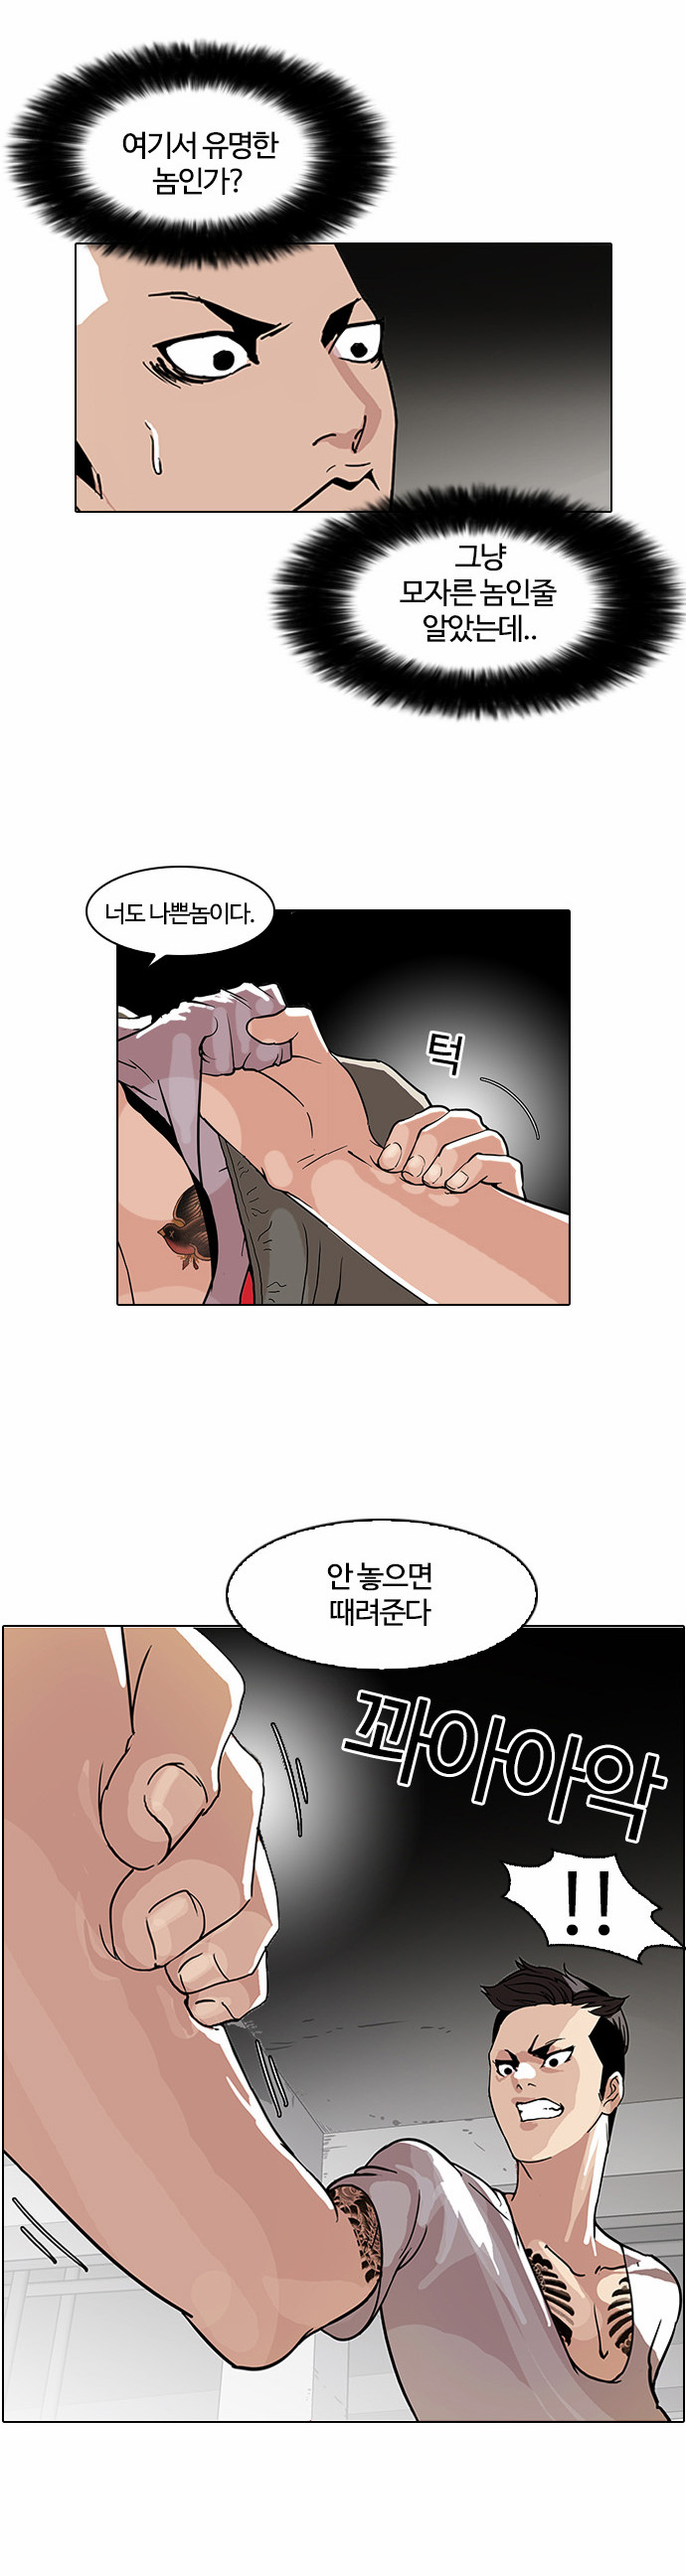 Lookism - Chapter 68 - Page 2